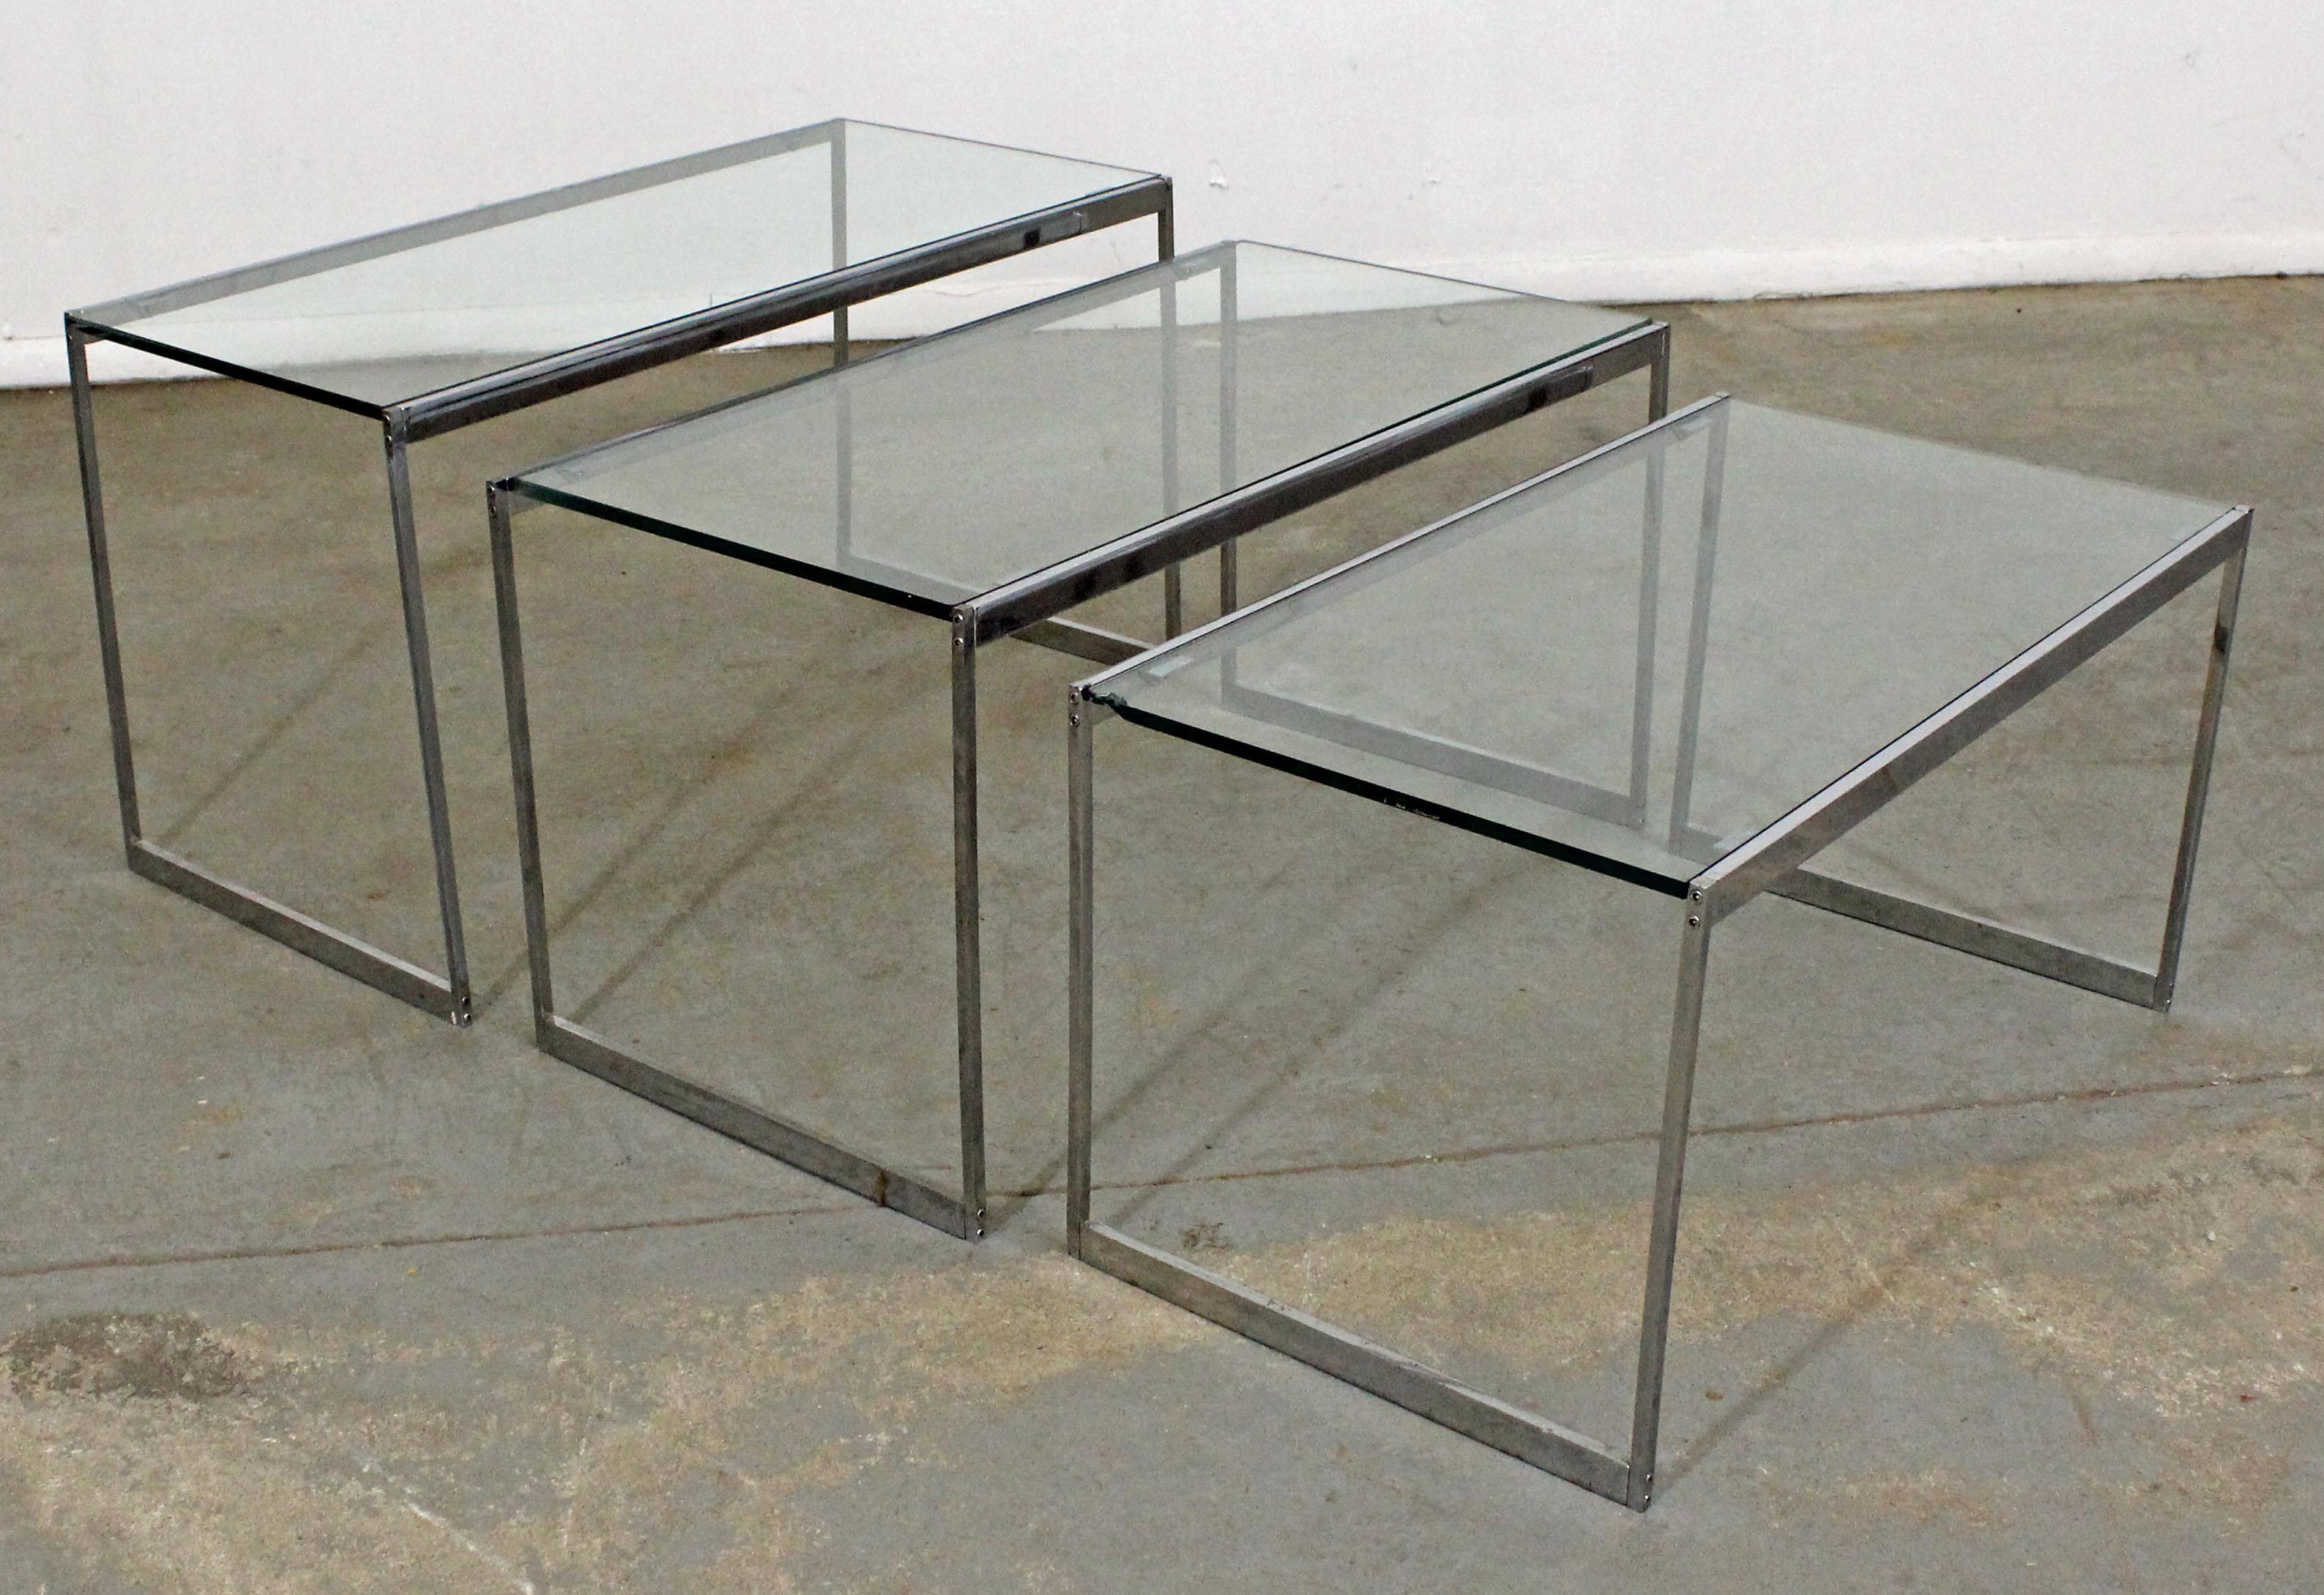 Set of 3 Mid-Century Modern chrome glass top nesting end tables

Offered is a set of 3 Mid-Century Modern glass top and chrome nesting tables. They are in decent condition showing some age wear (see pictures). They are not signed. Check out our